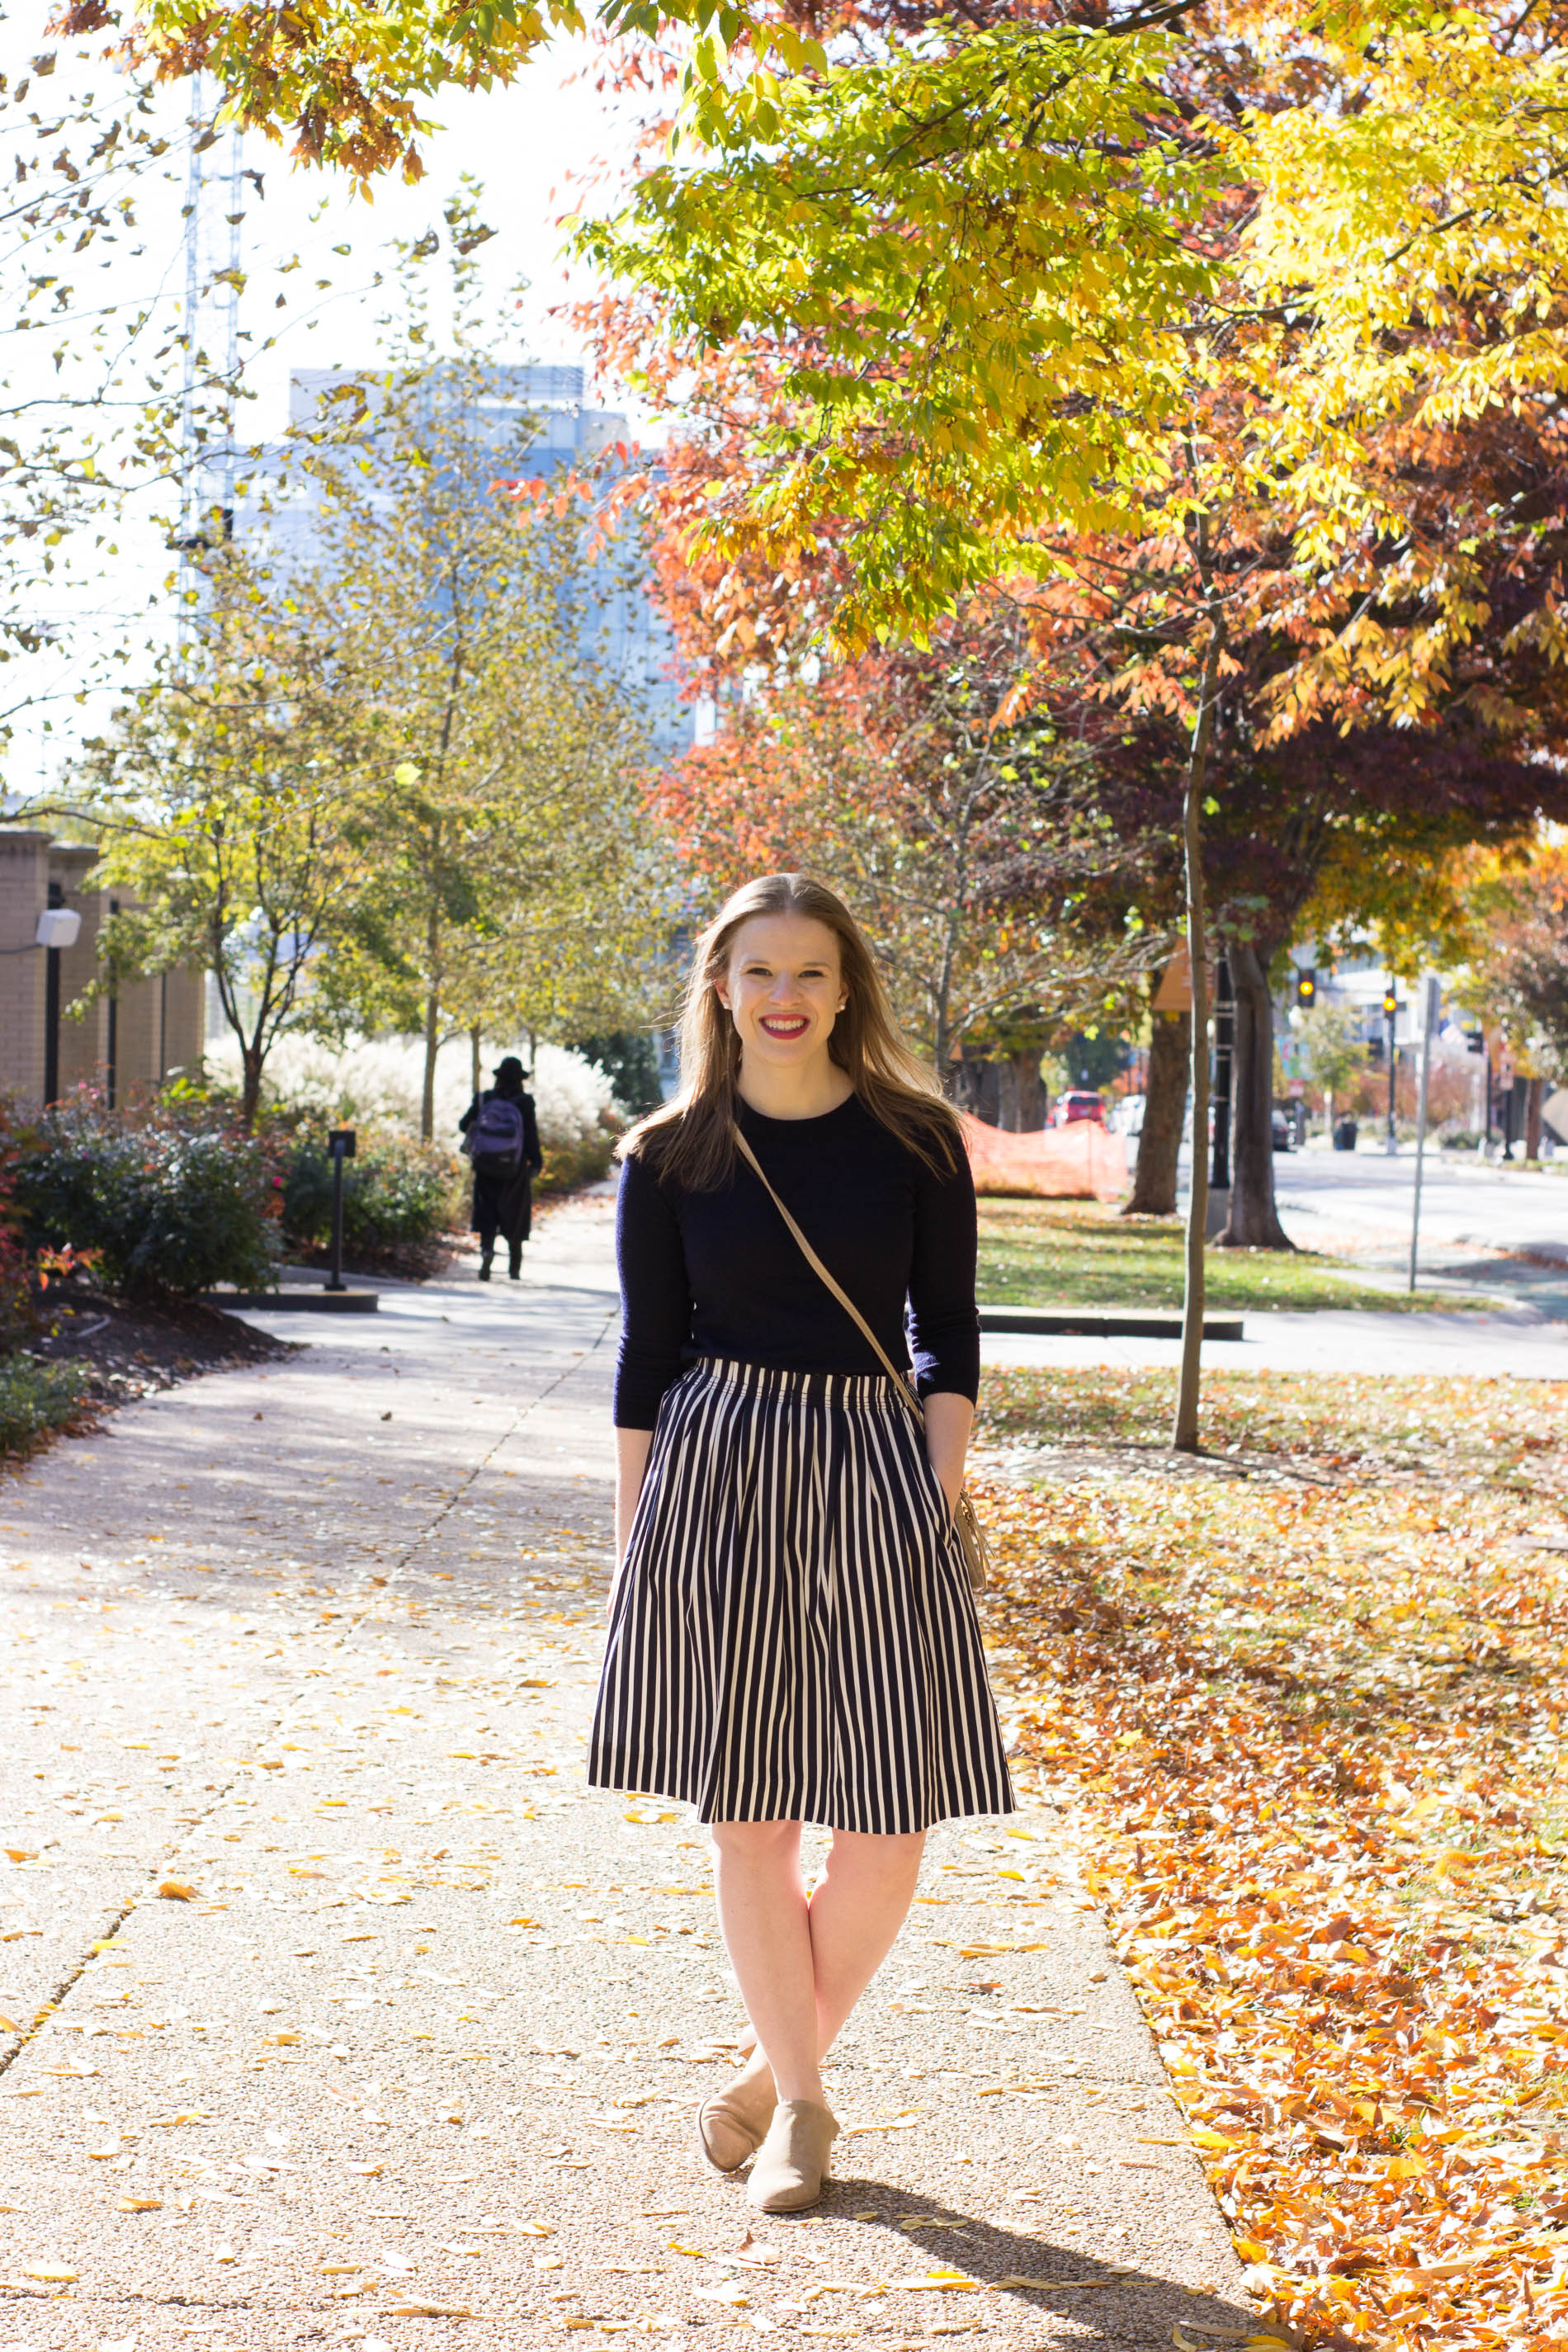 My Top 10 Favorite Outfits of 2017 | Something Good, @danaerinw , women, fashion, clothing, style, clothes, holiday season, striped midi skirt, navy and white stripes, navy crew neck sweater, j.crew factory, j.crew, crossbody bag, everlane shoes, mules, heeled mules, thanksgiving ideas, fashion